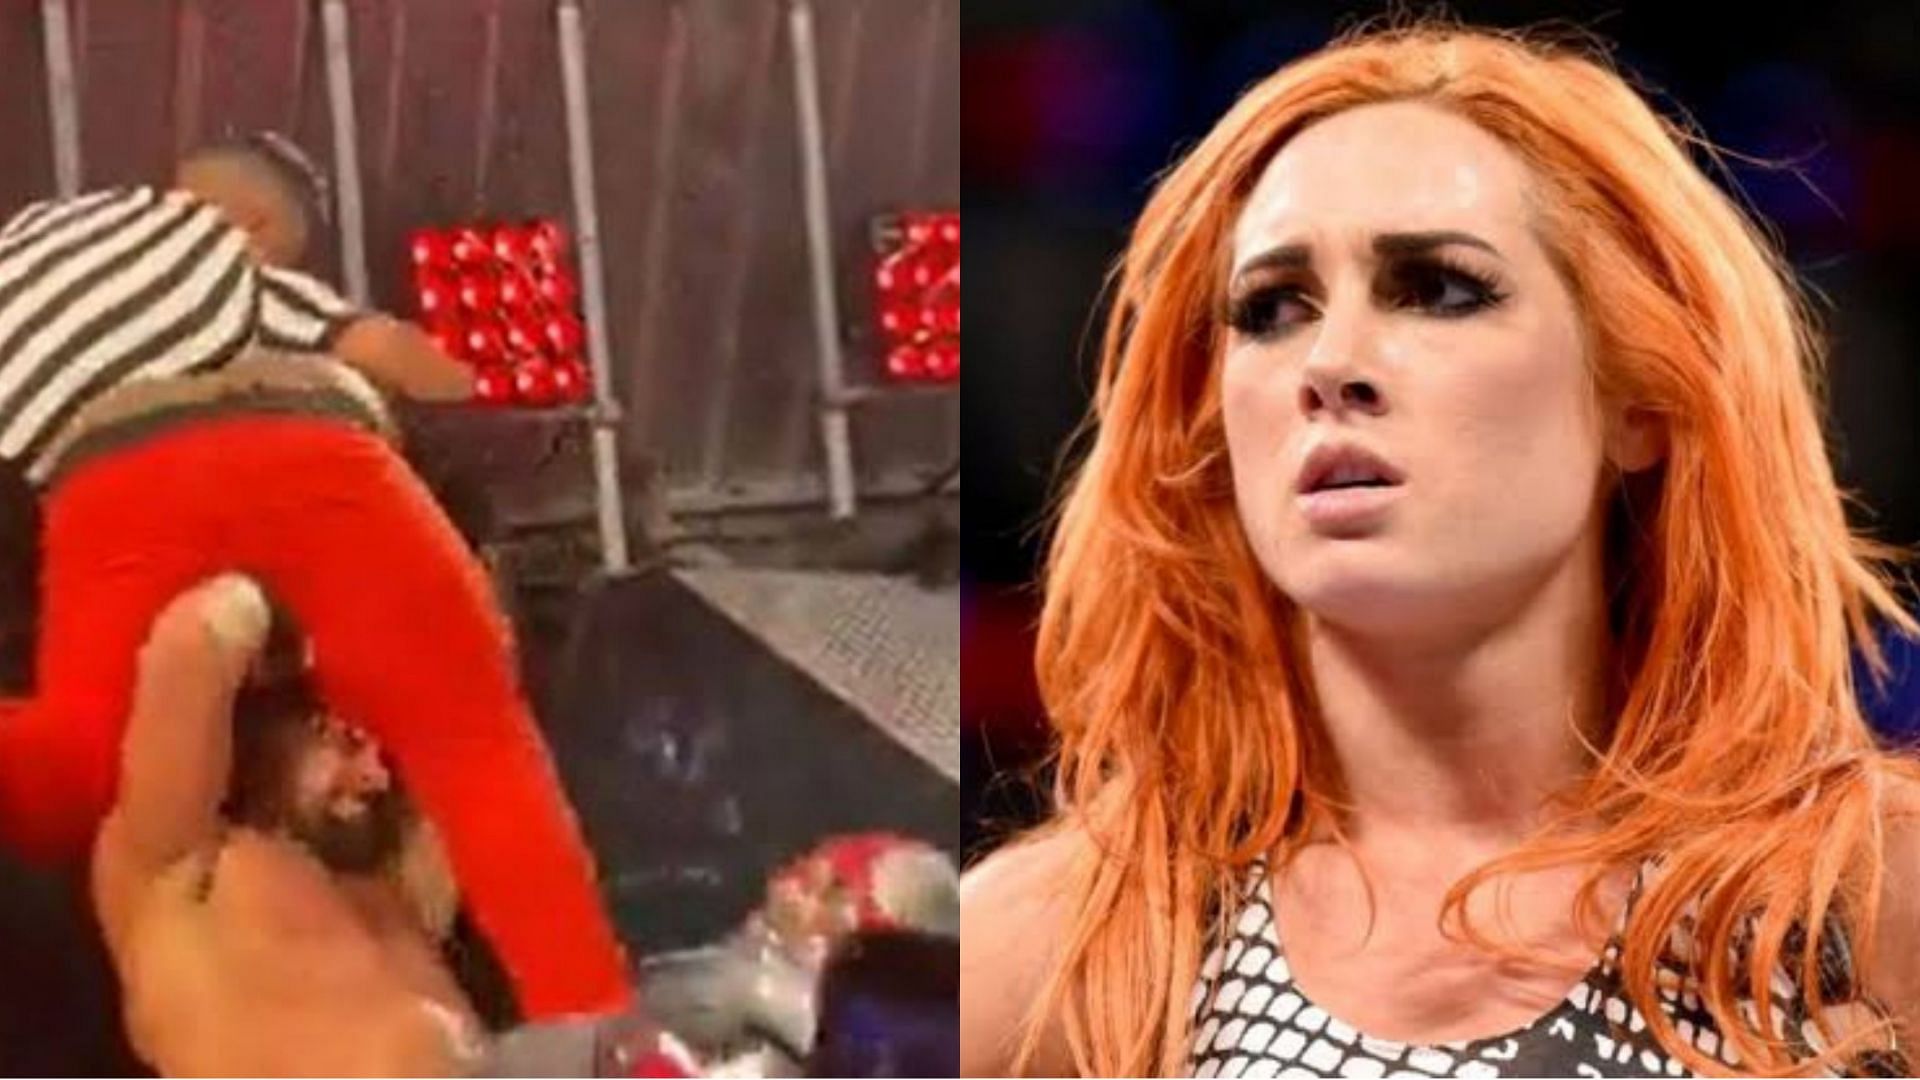 The fan attack on Seth Rollins scared Becky Lynch.